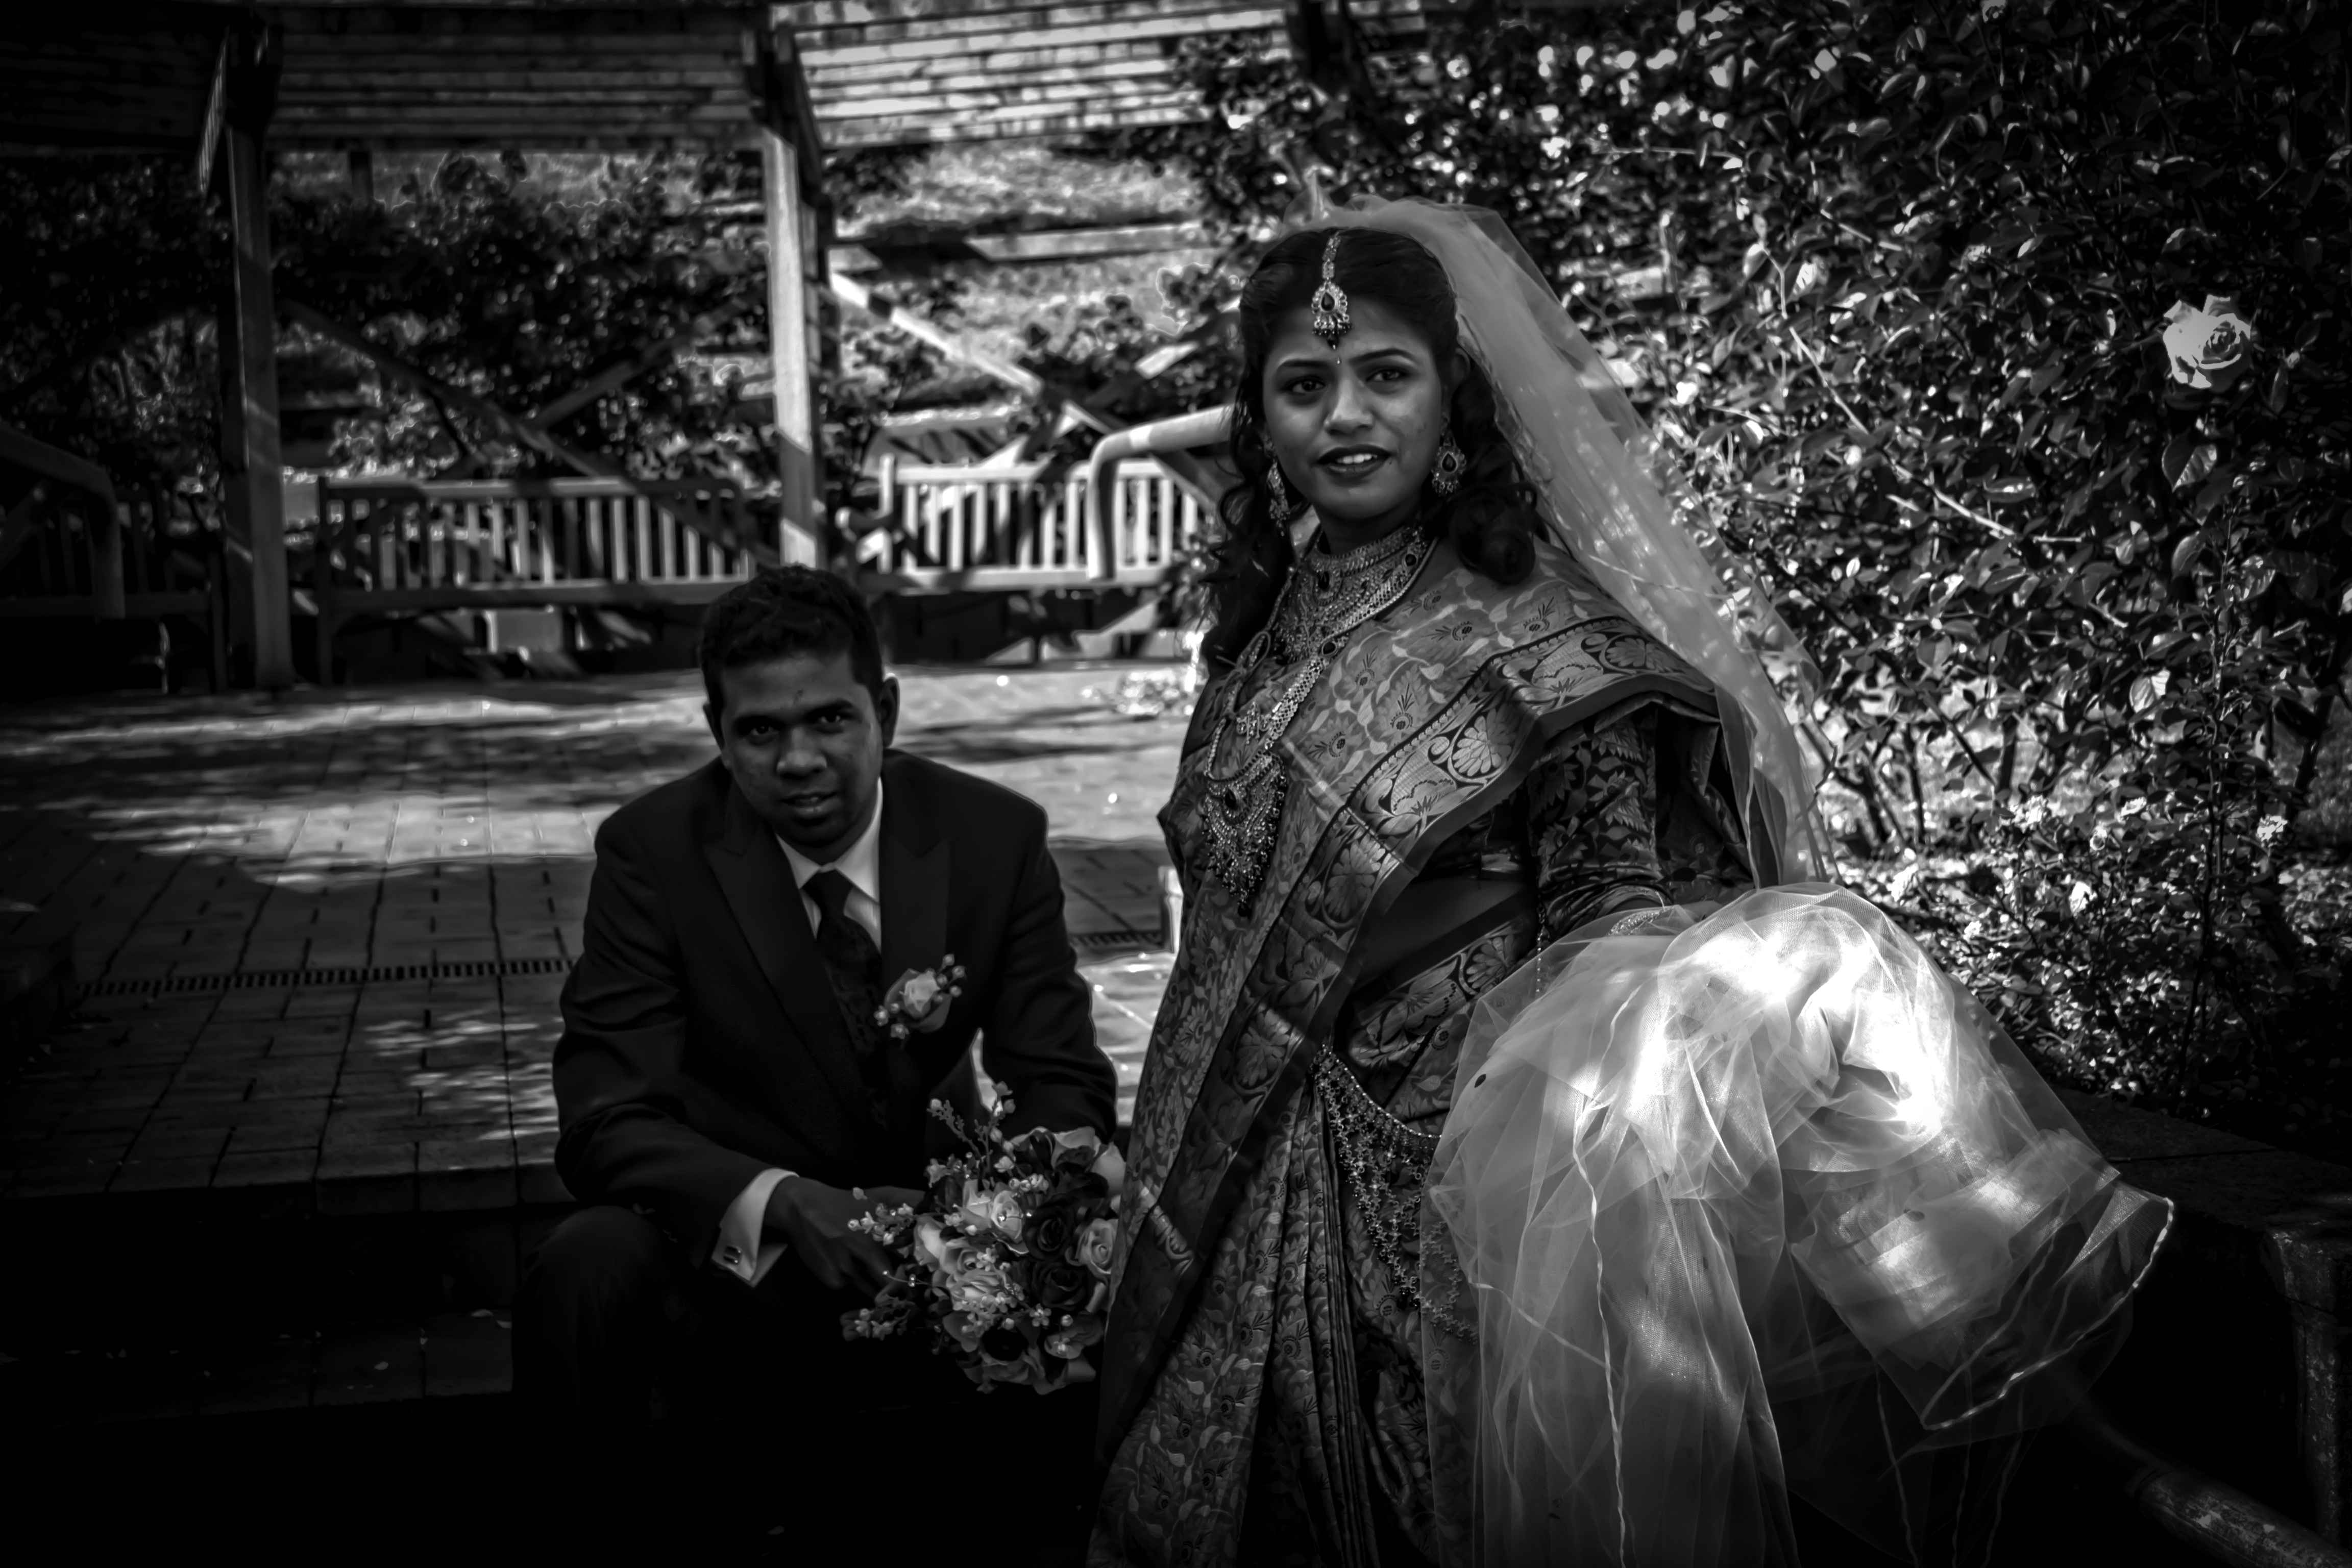 grayscale photo of bride and groom